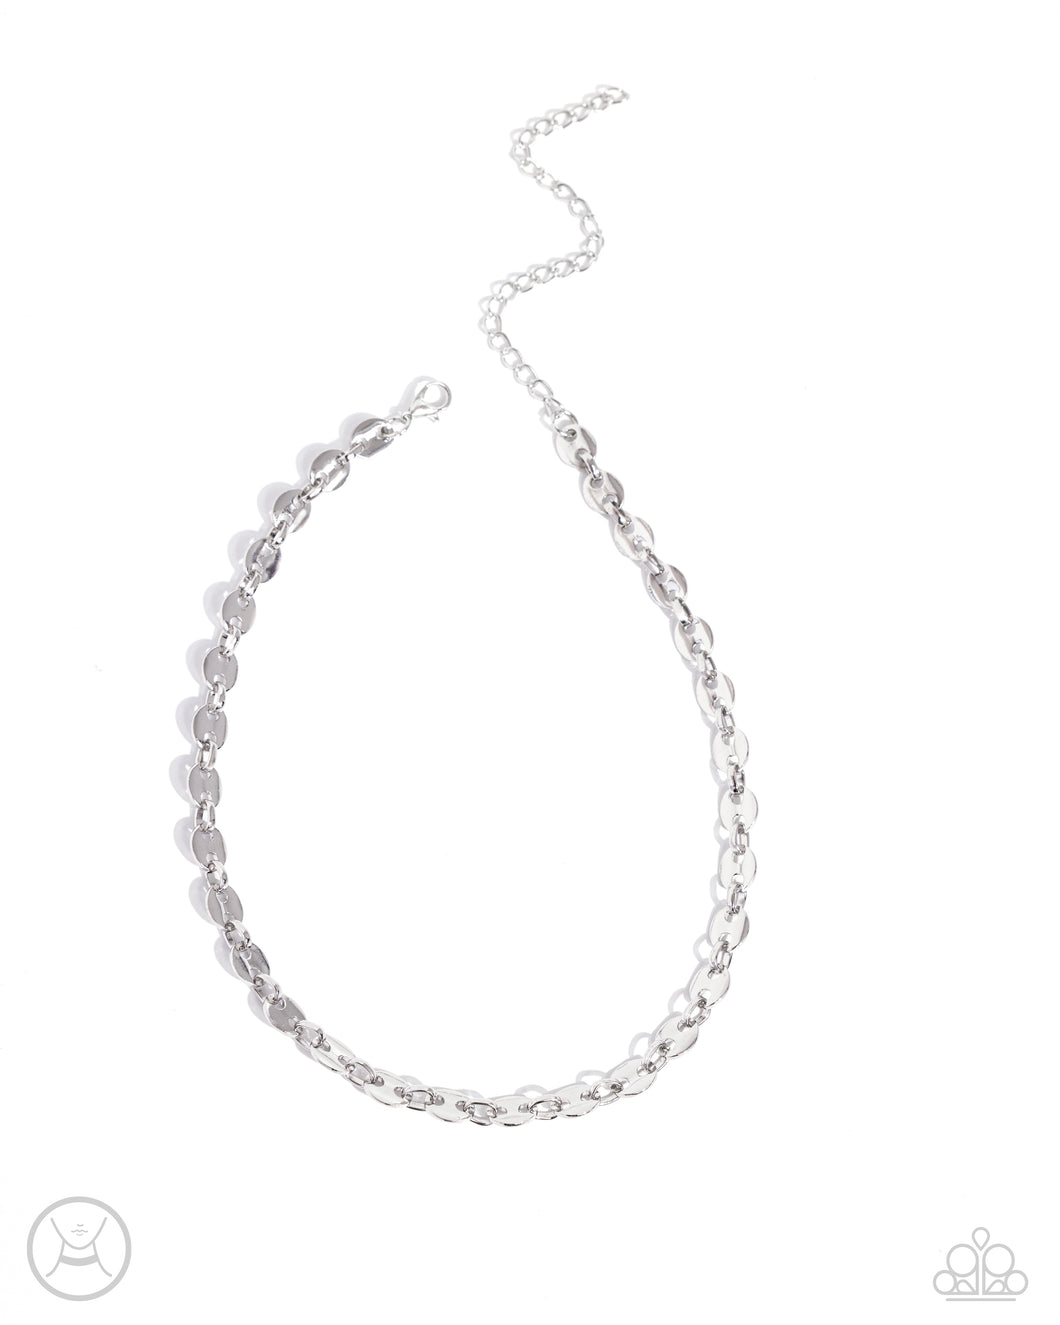 Abstract Advocate - Silver Choker Necklace